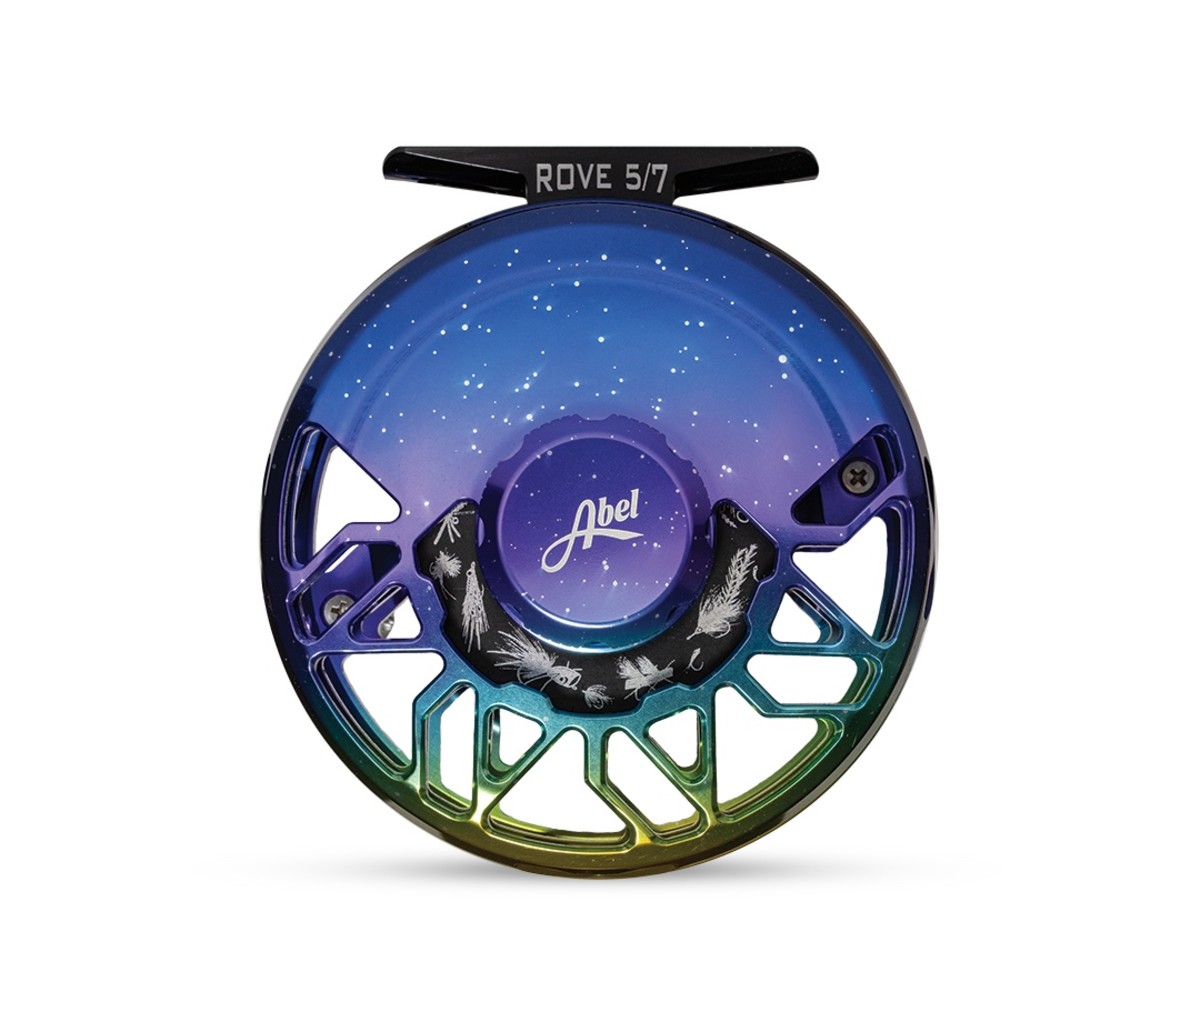 Add the Abel Rove reel to your next saltwater fly fishing trip.